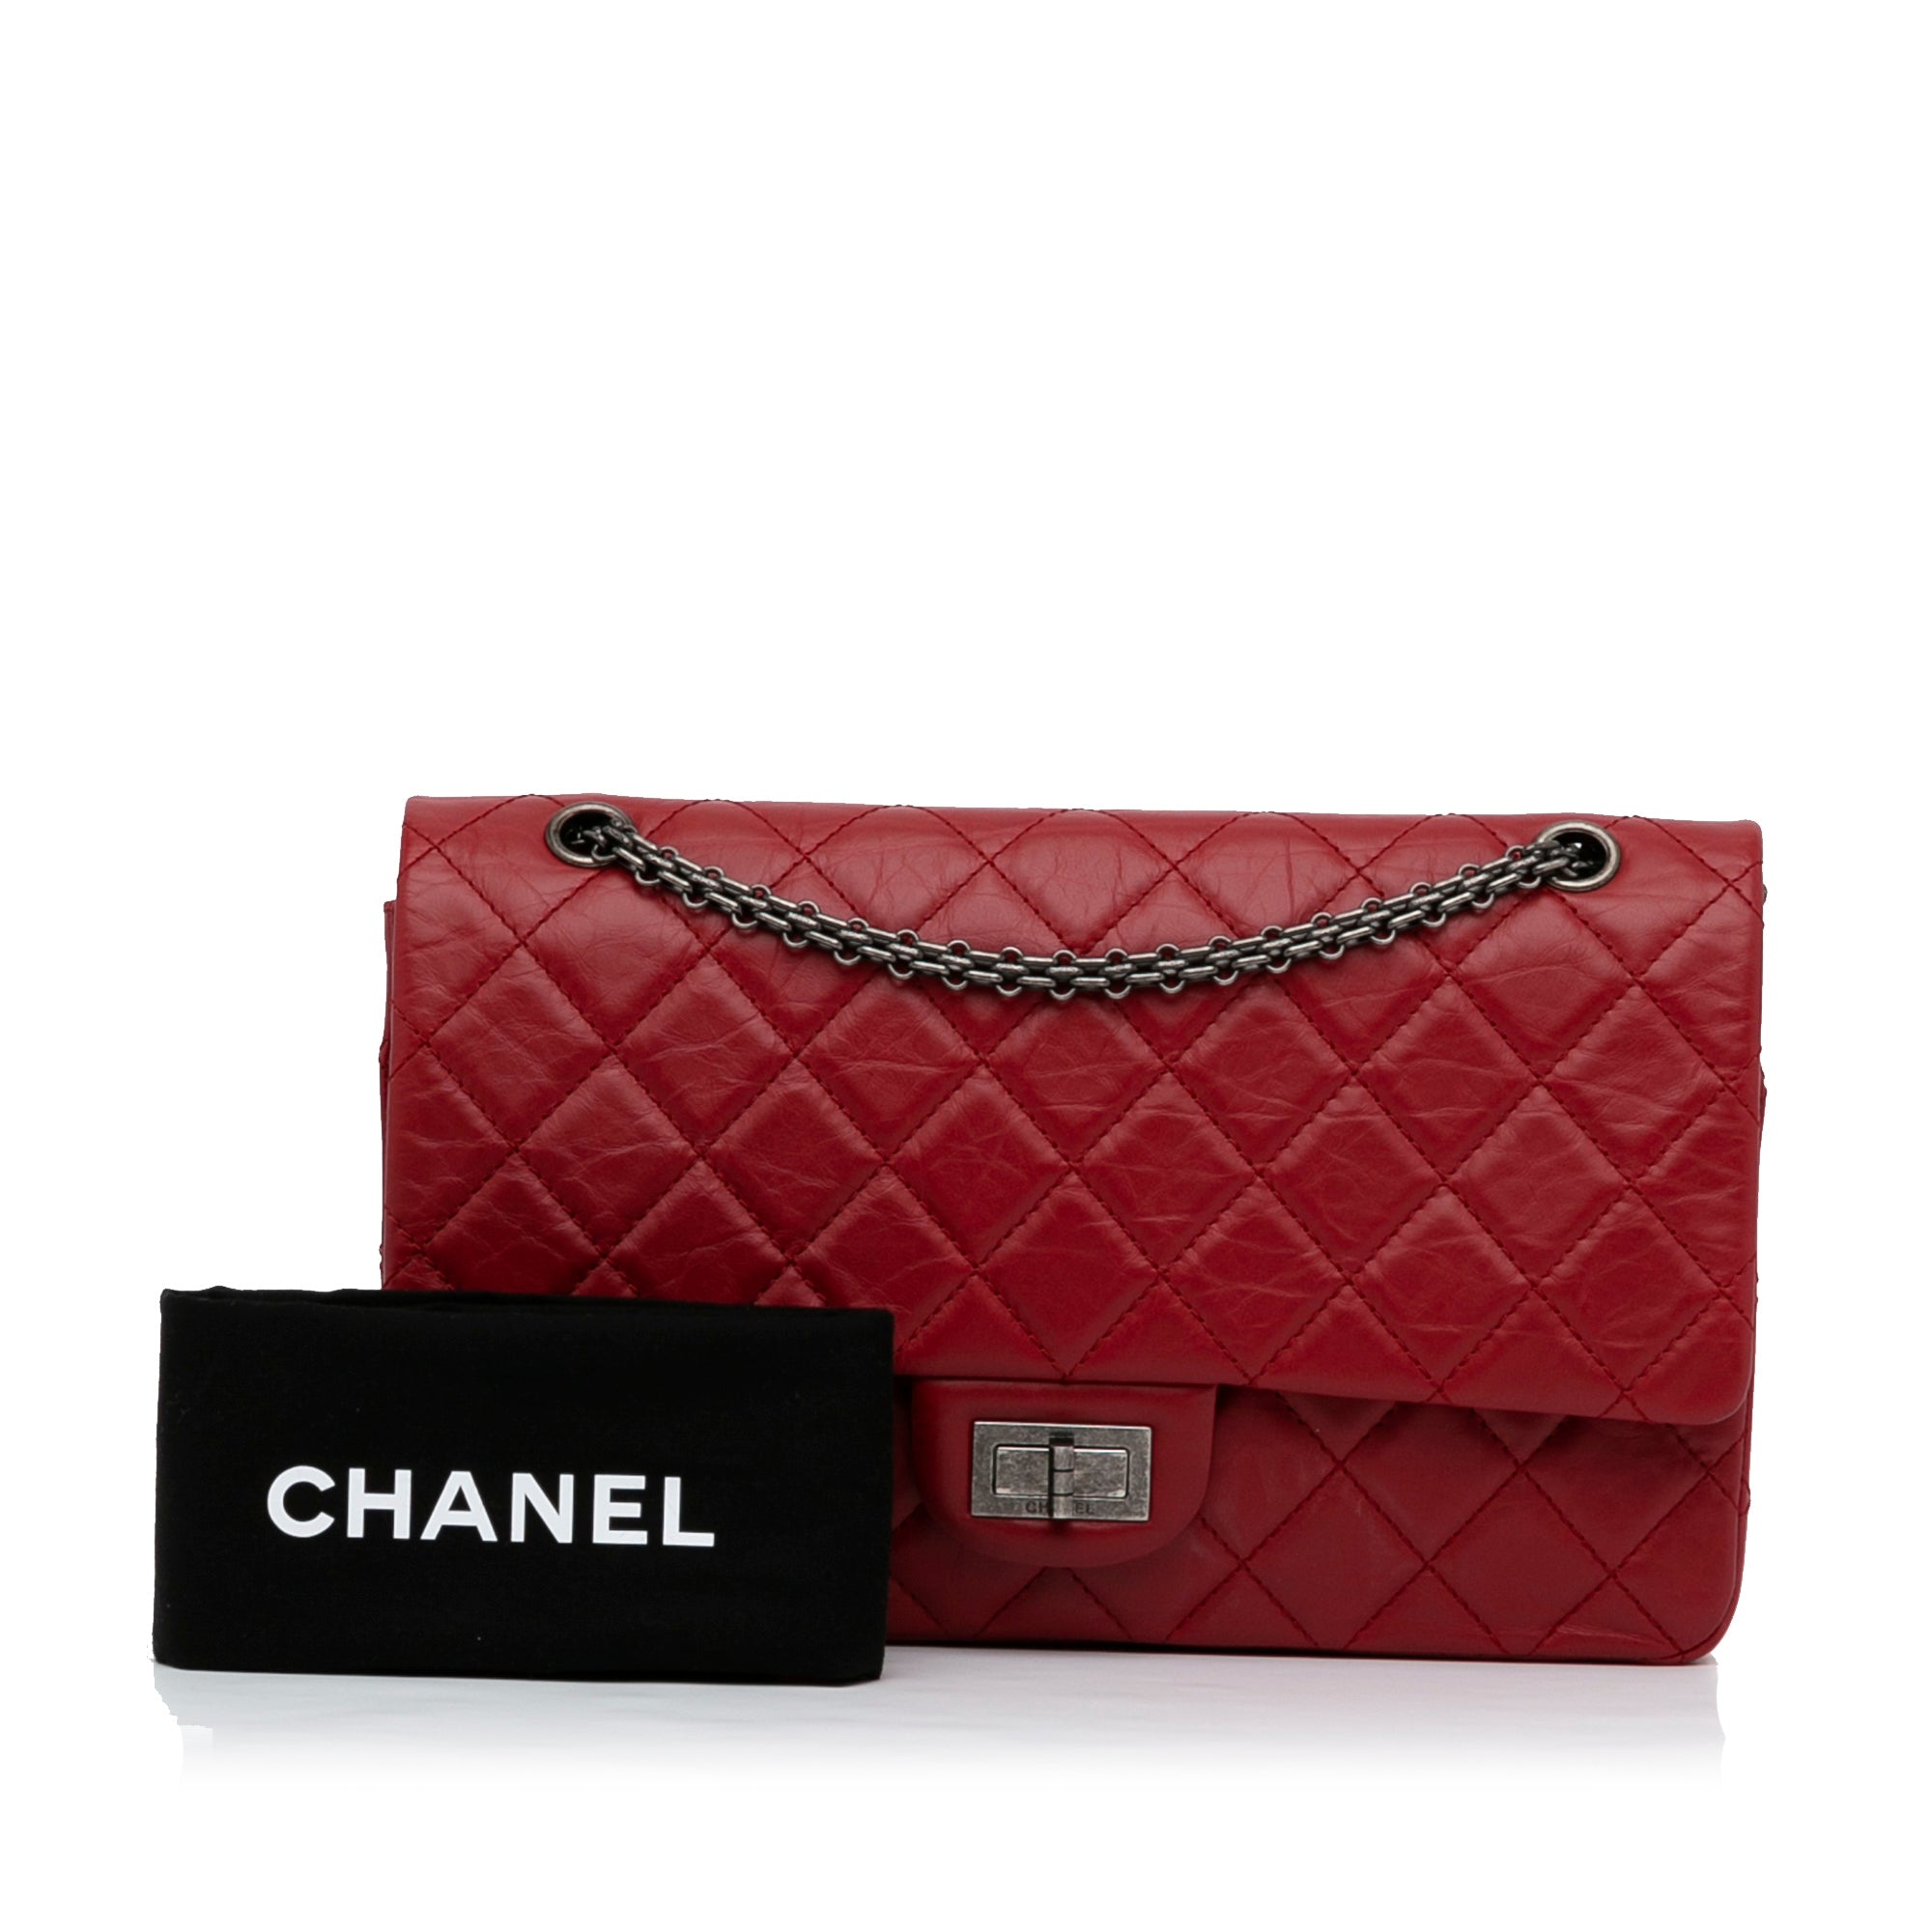 Chanel Reissue 2.55 Flap Bag Crocodile Quilted Jersey 226